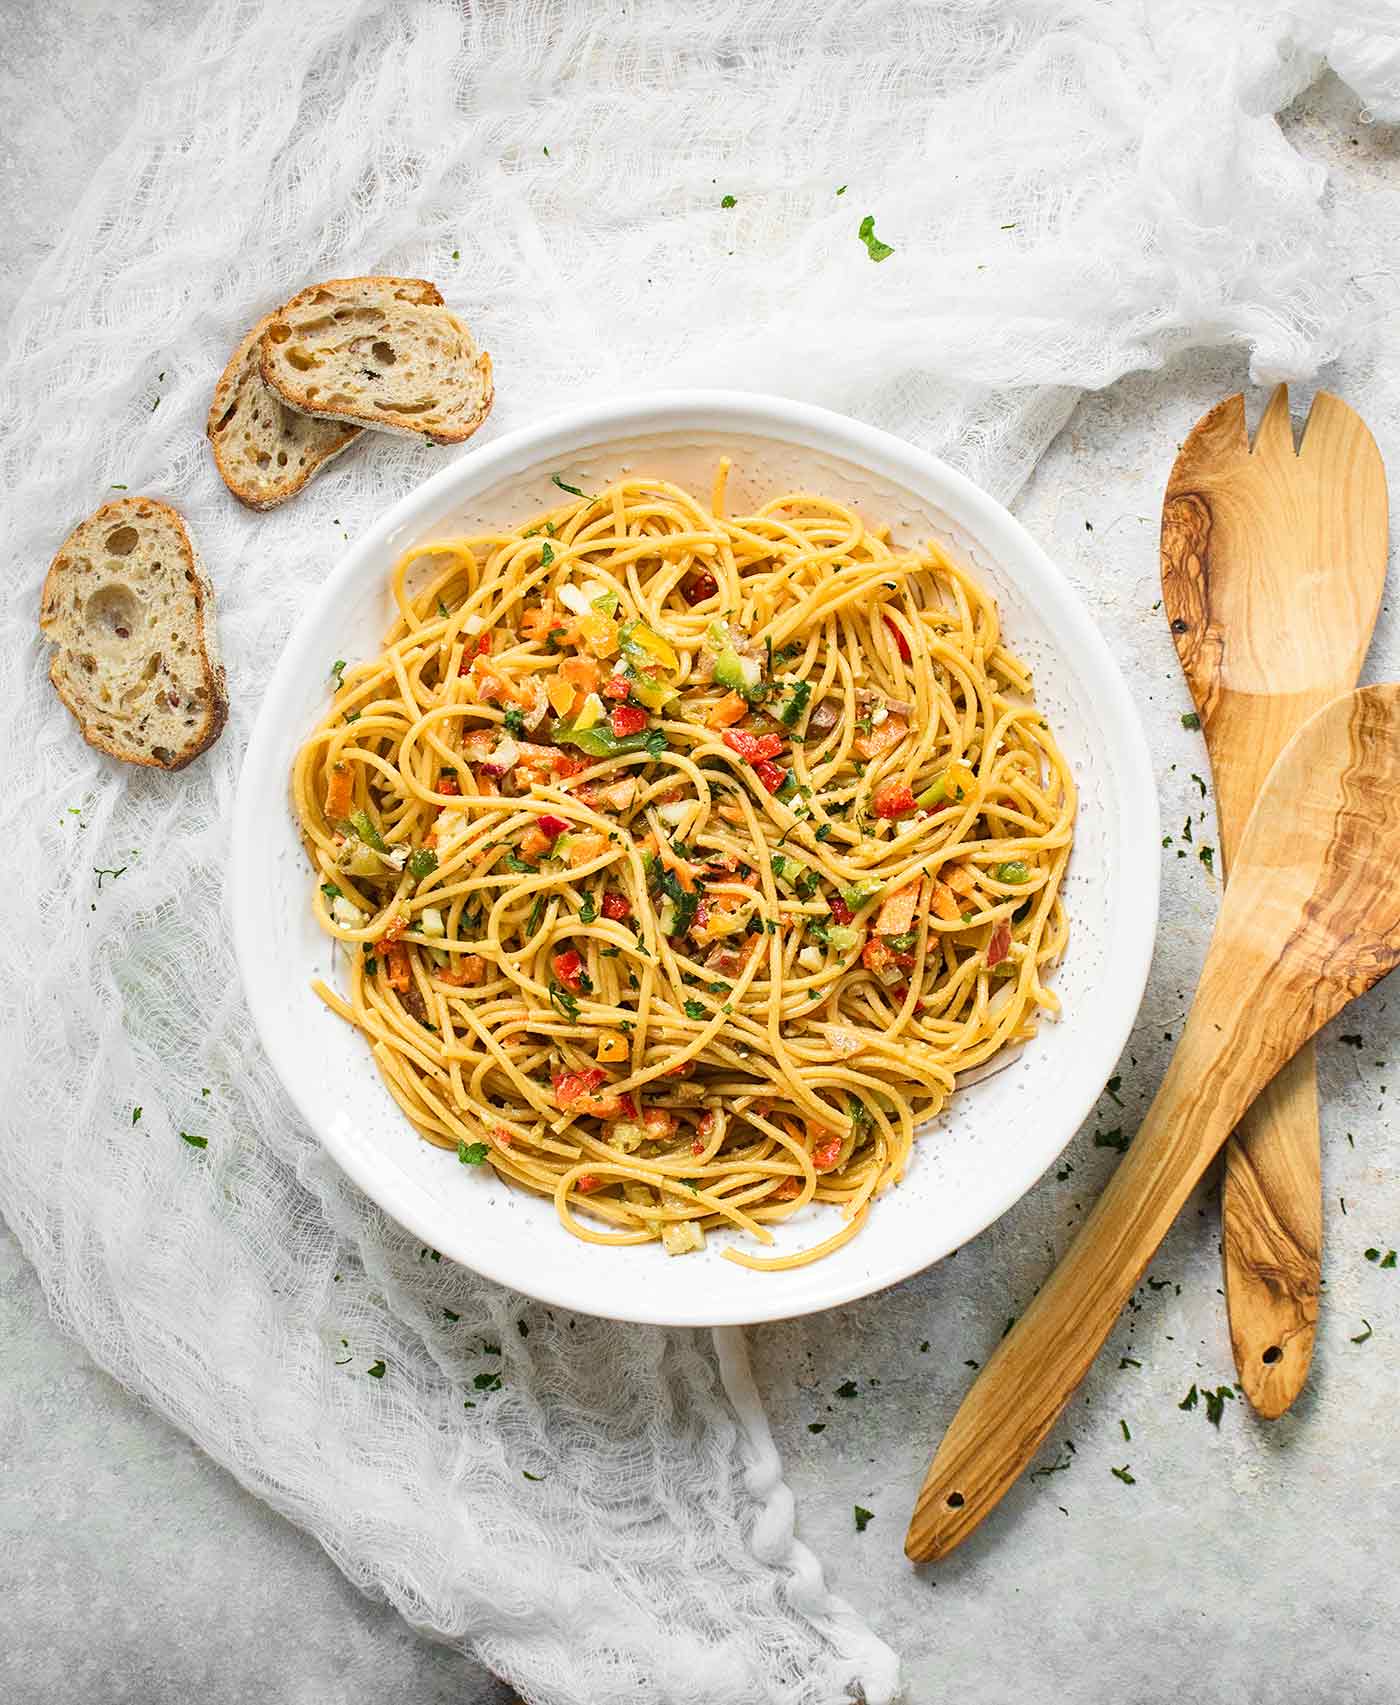 Cold Spaghetti Salad in a big, white serving bowl with wooden serving spoons on the side